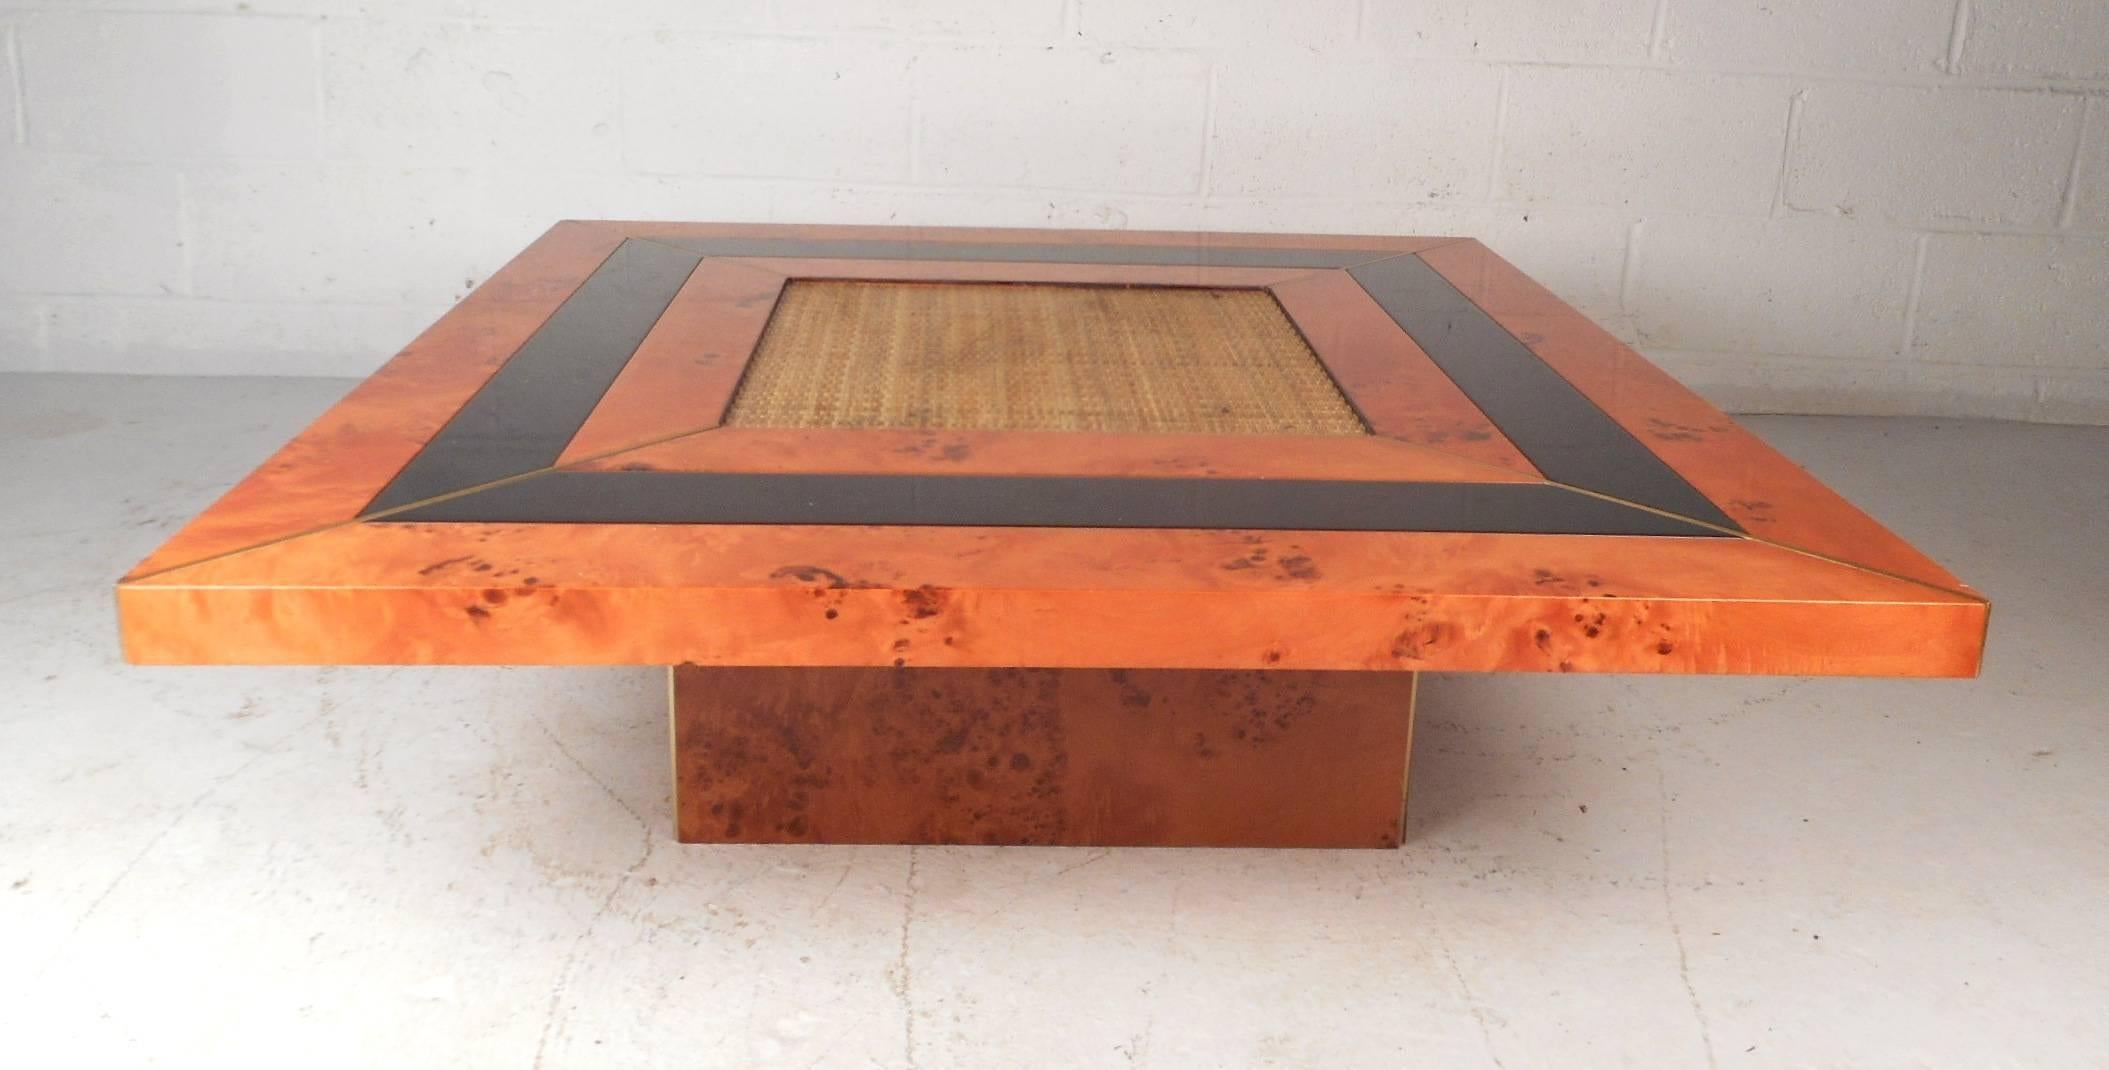 This beautiful vintage modern coffee table is made of burl wood with a woven center. Sleek low design with a black lacquer strip wrapping all the way around the top between the burl. This unusual piece has brass trim running from each corner to the